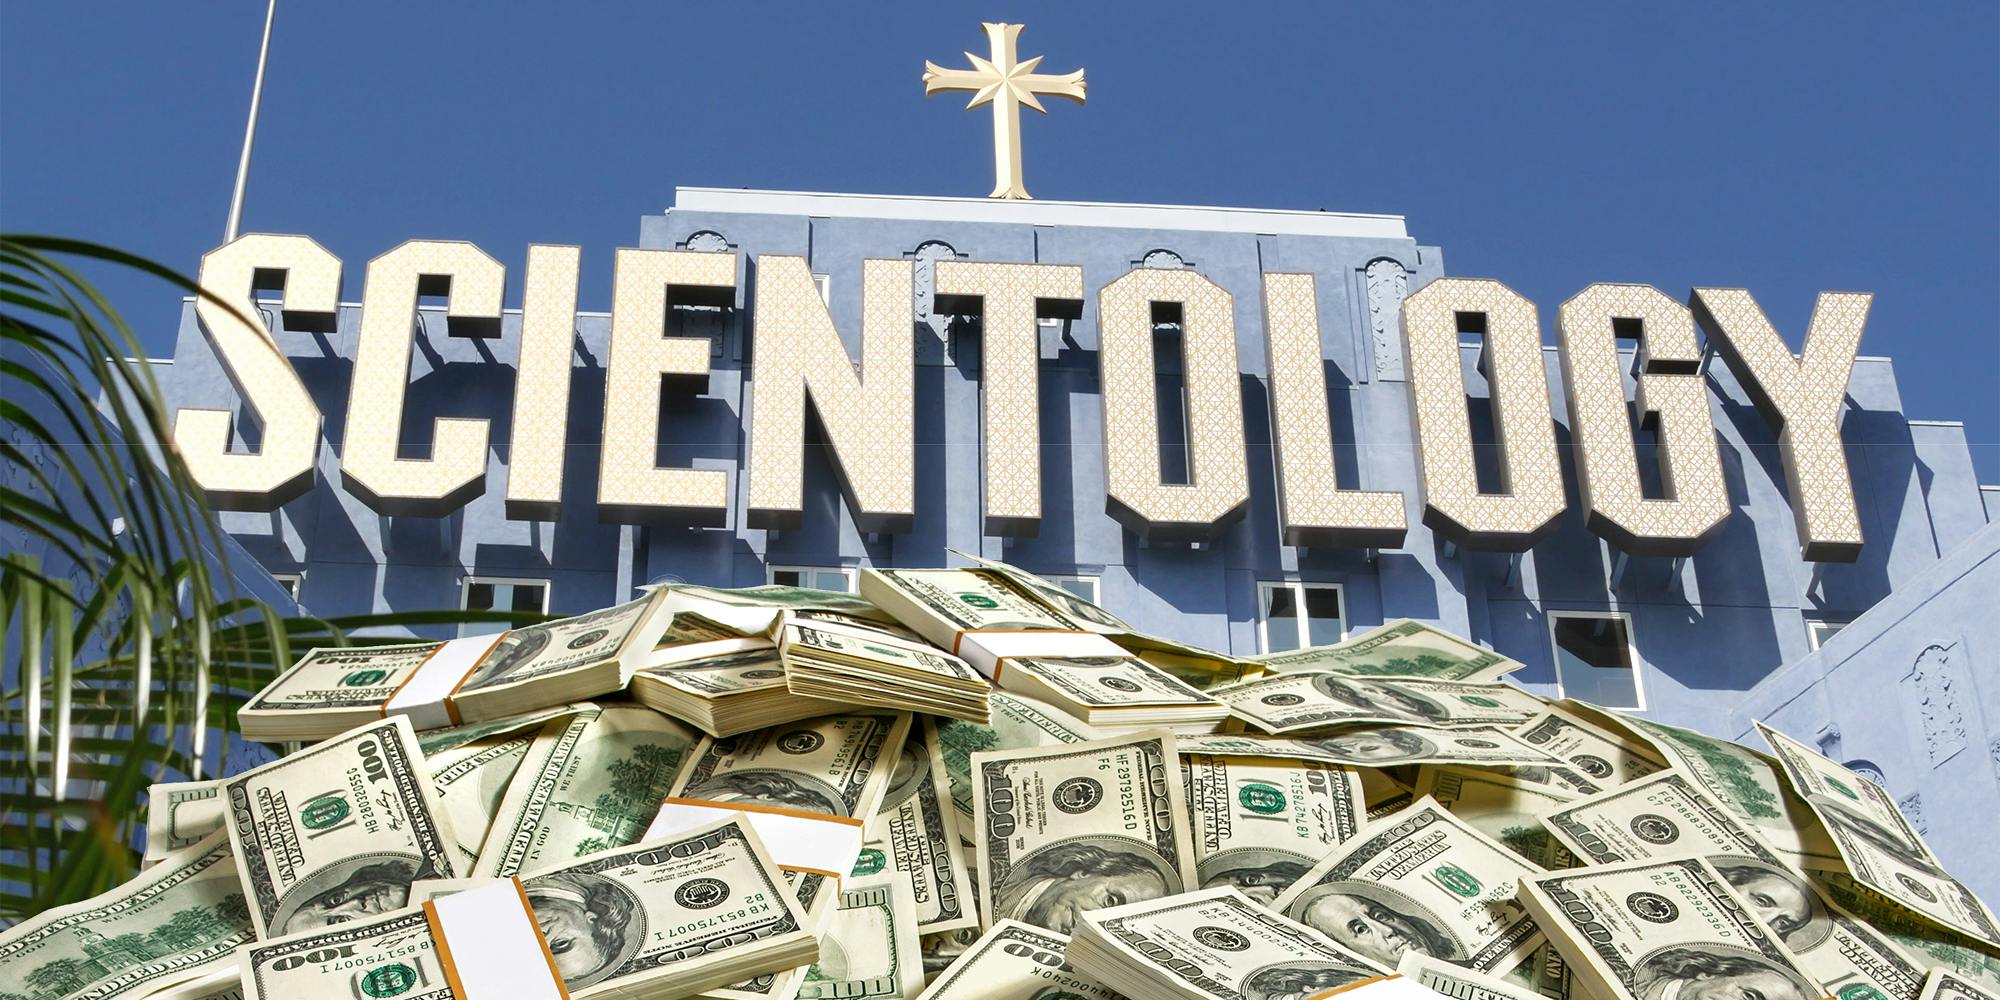 Scientology Church with Money Pile in the Middle